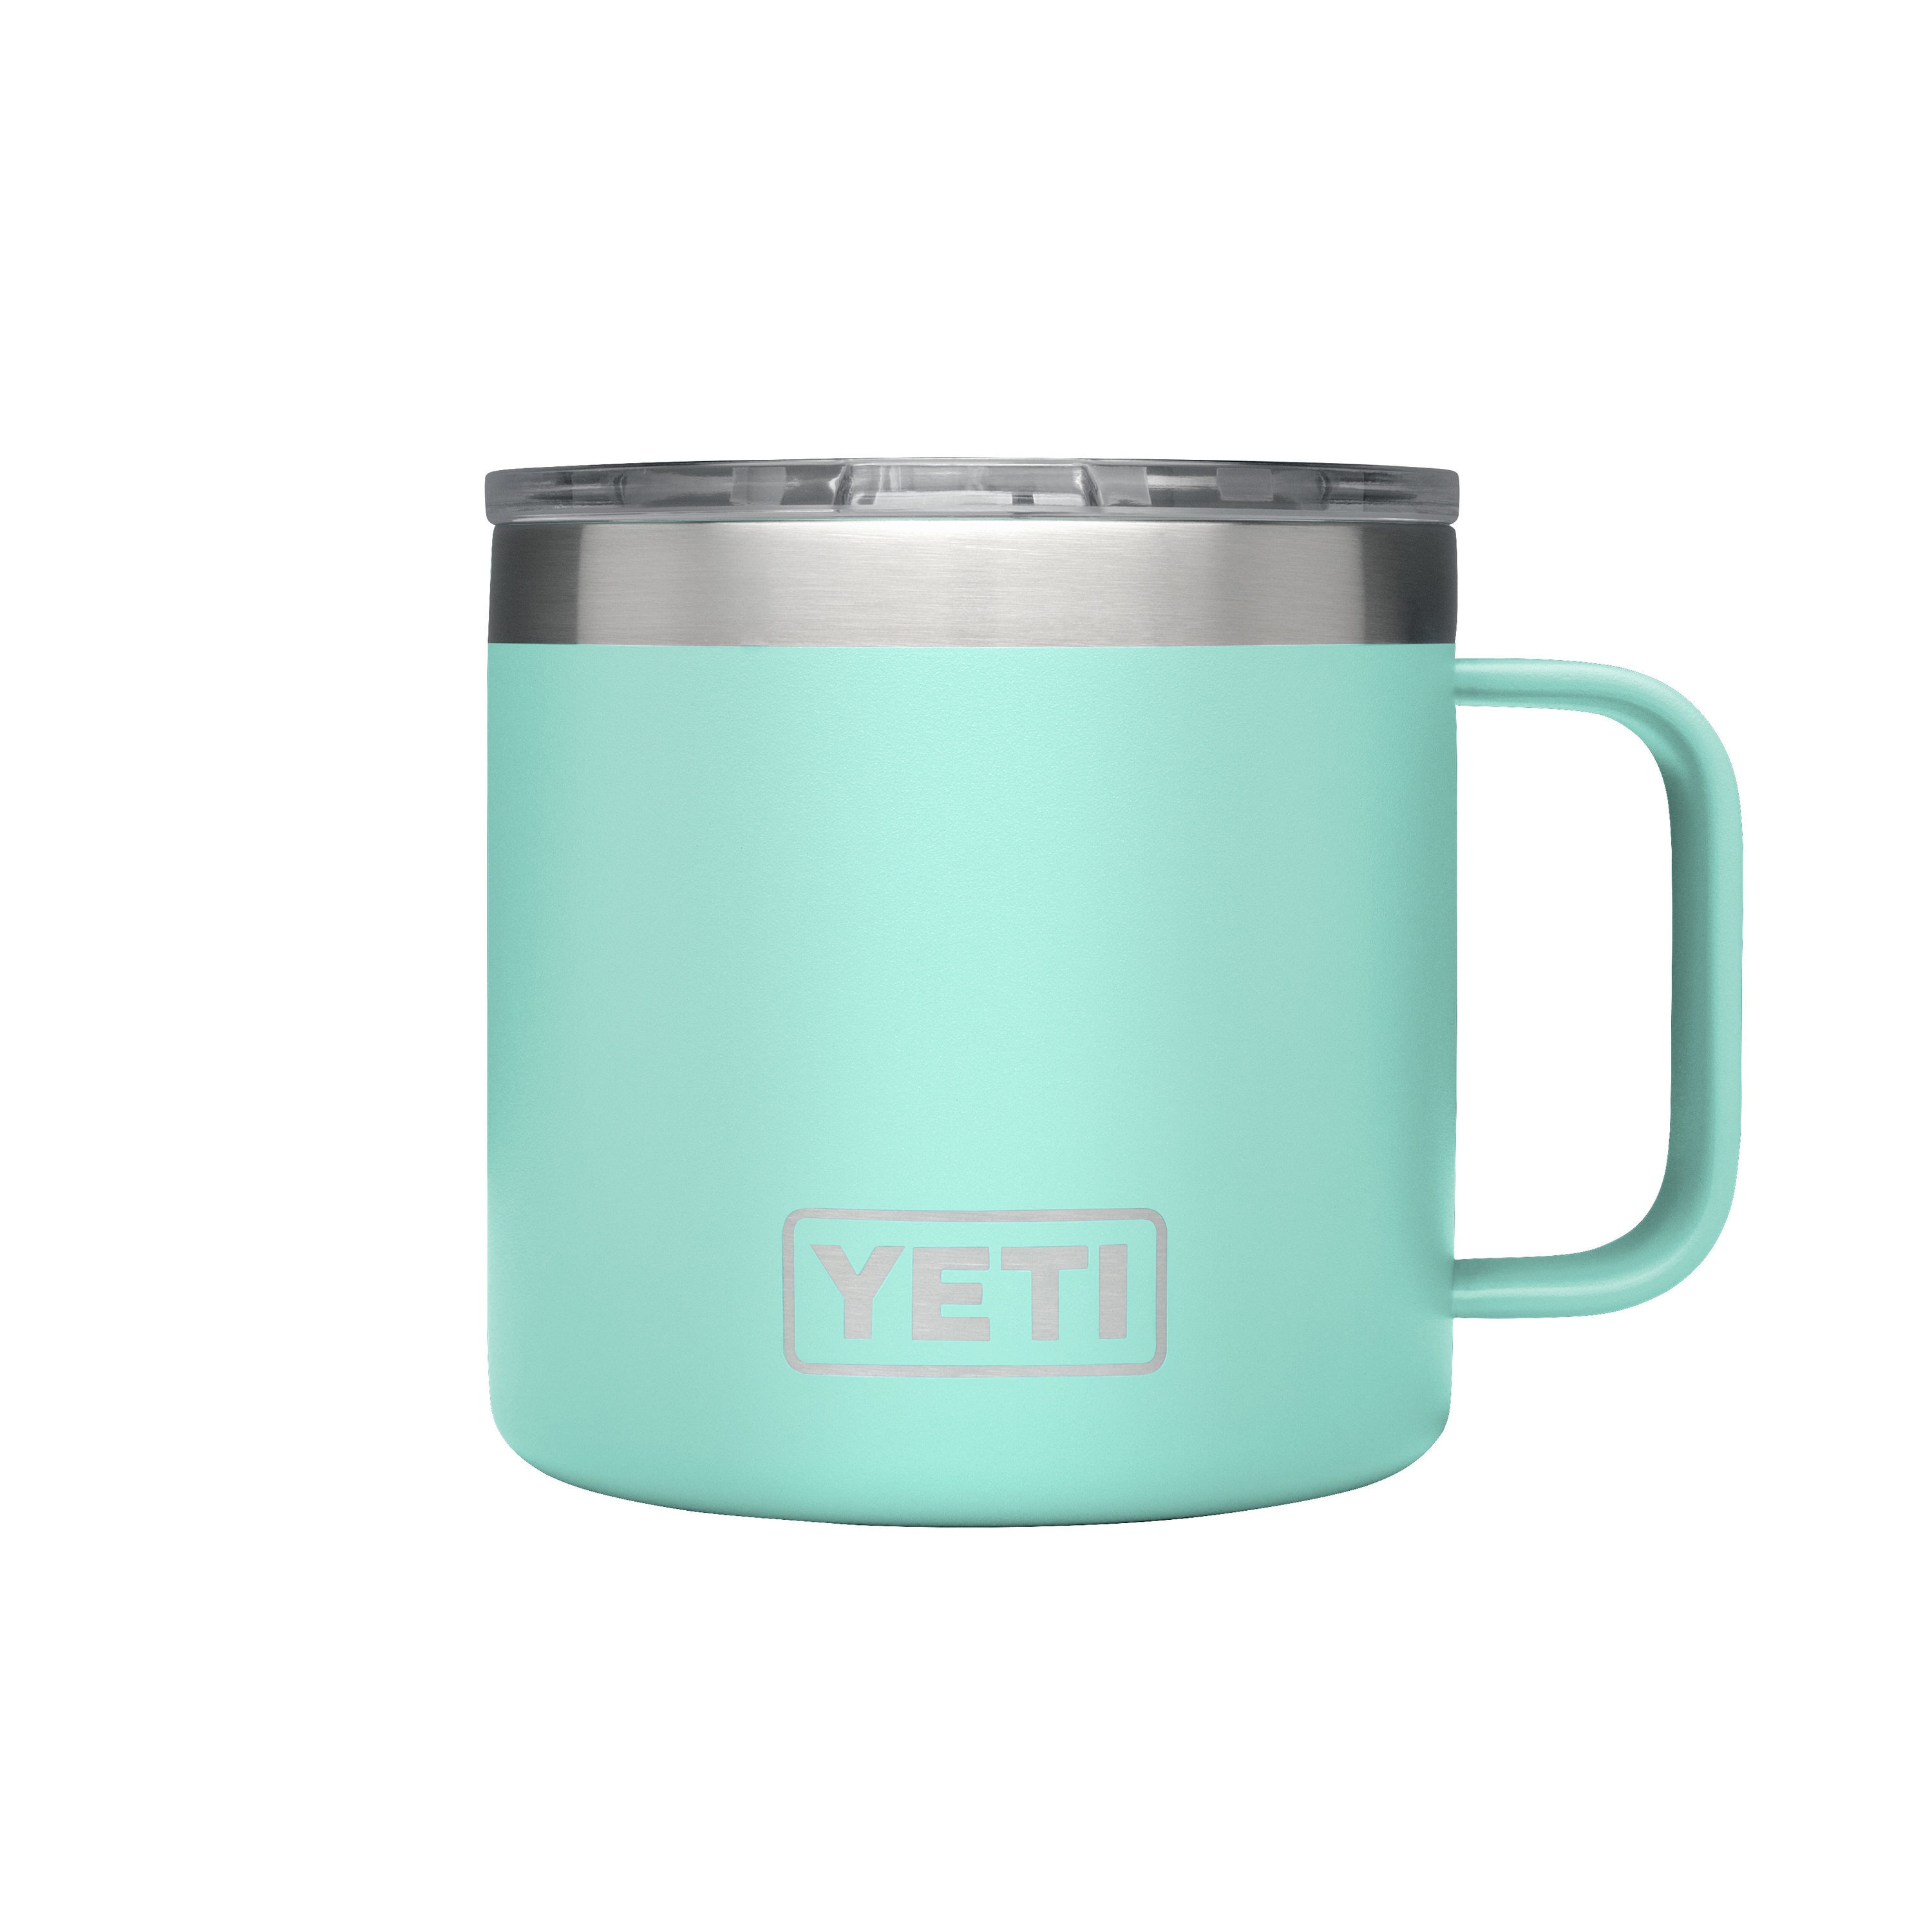 Yeti's Insulated and Durable Rambler Mug Now Comes in 24oz